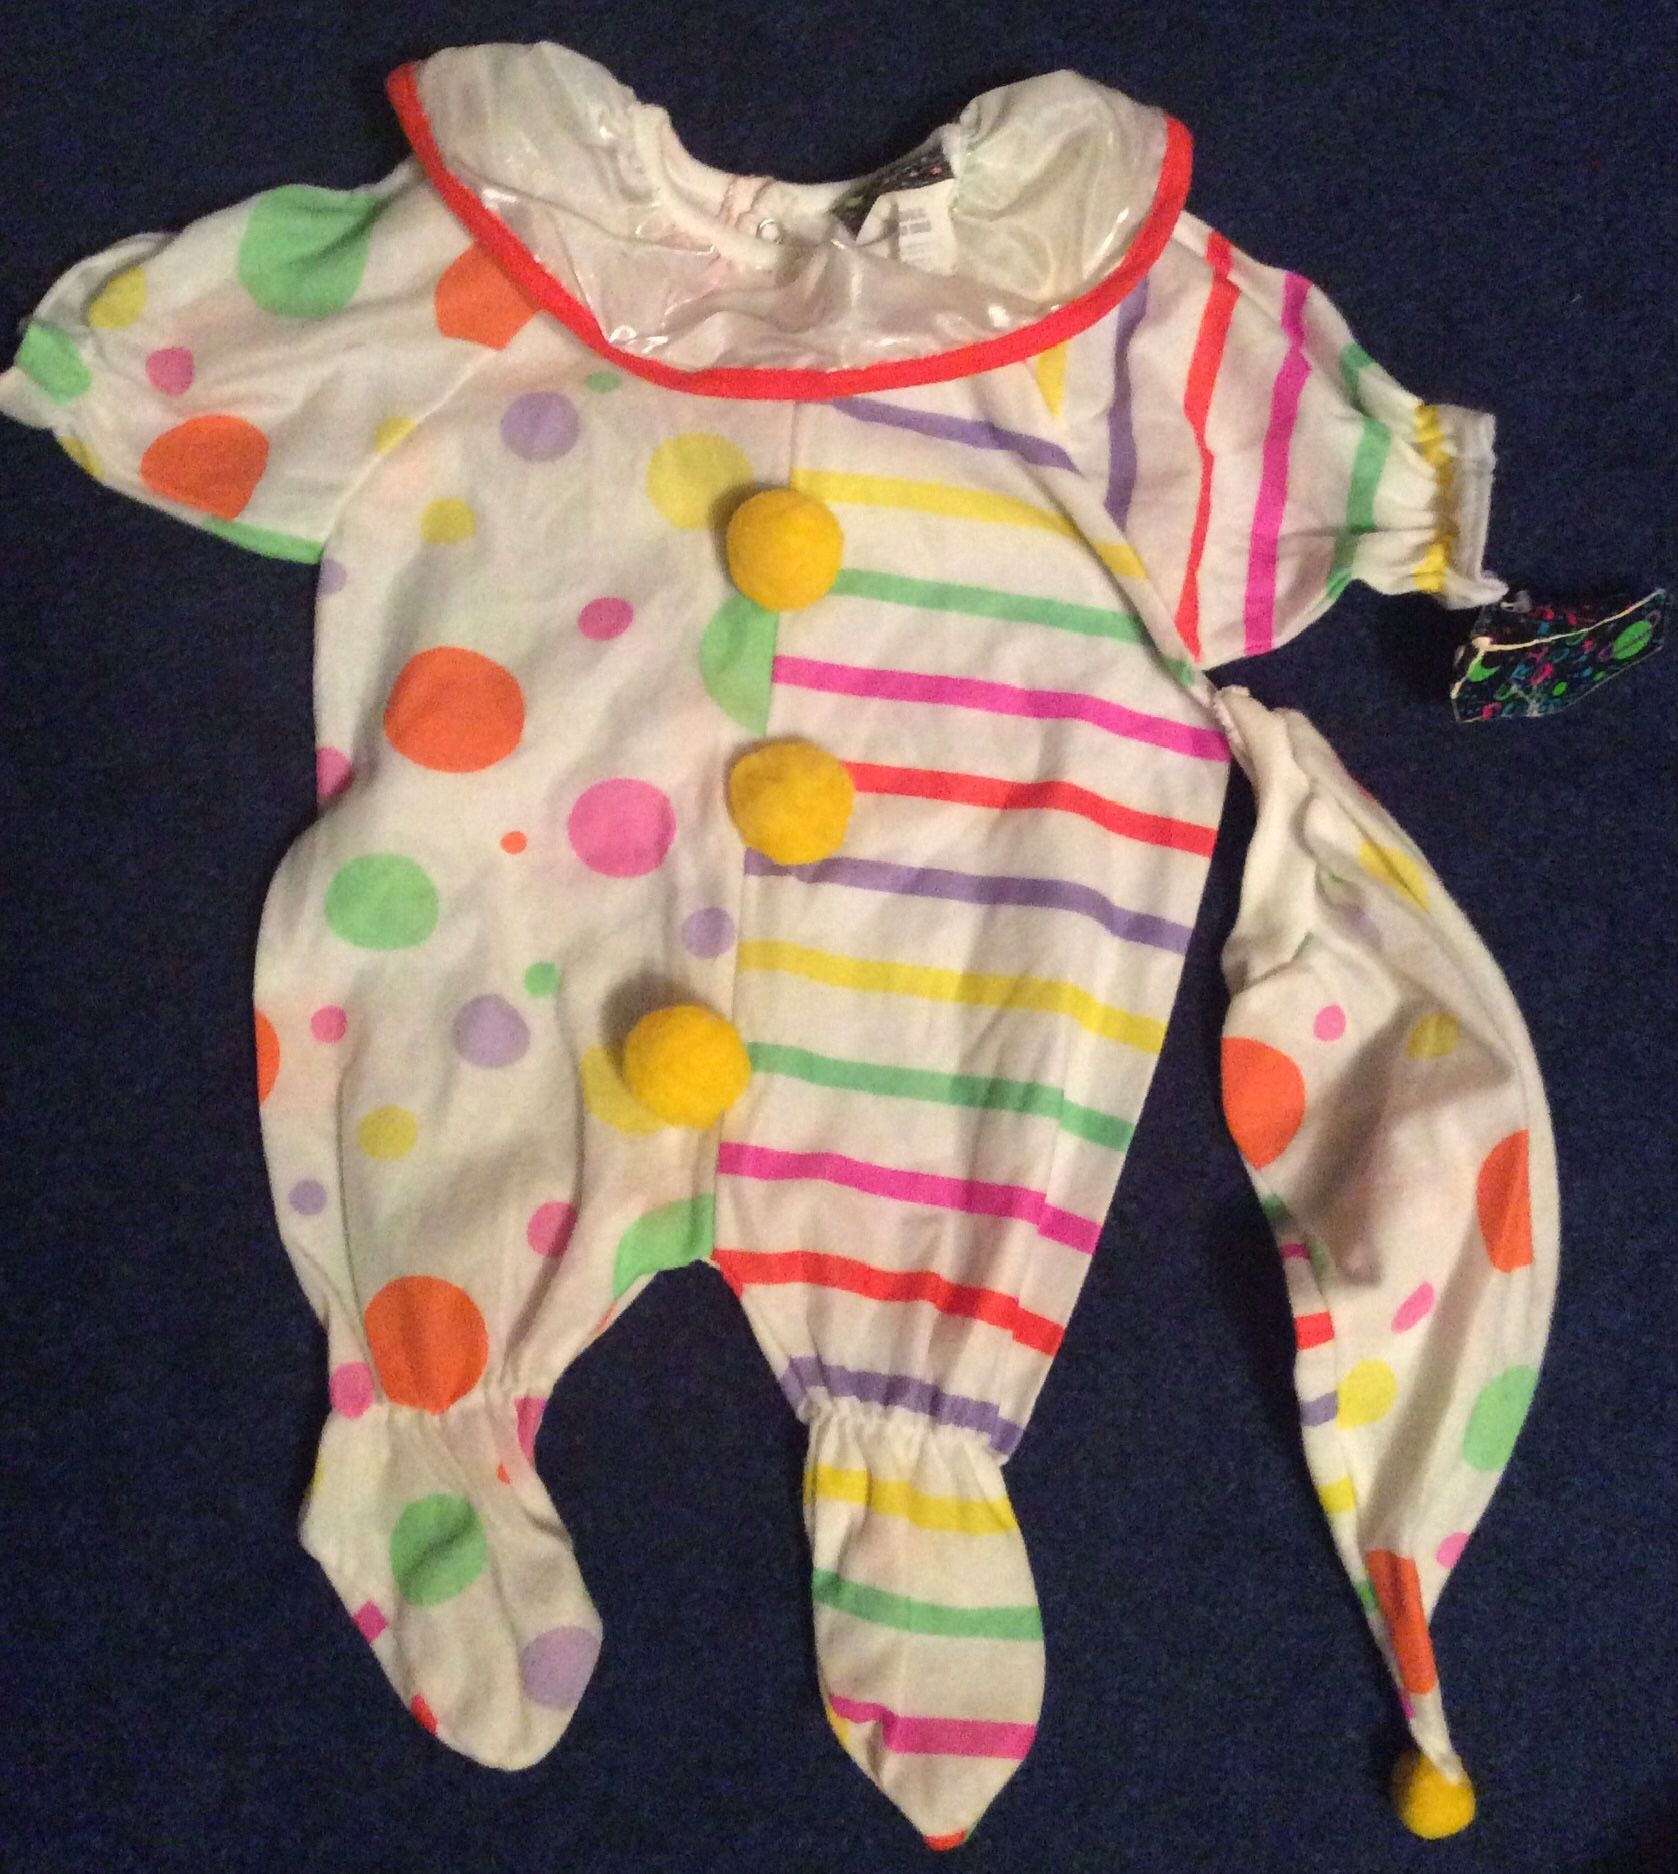 New 2 piece Halloween costume-size small-0-3 months